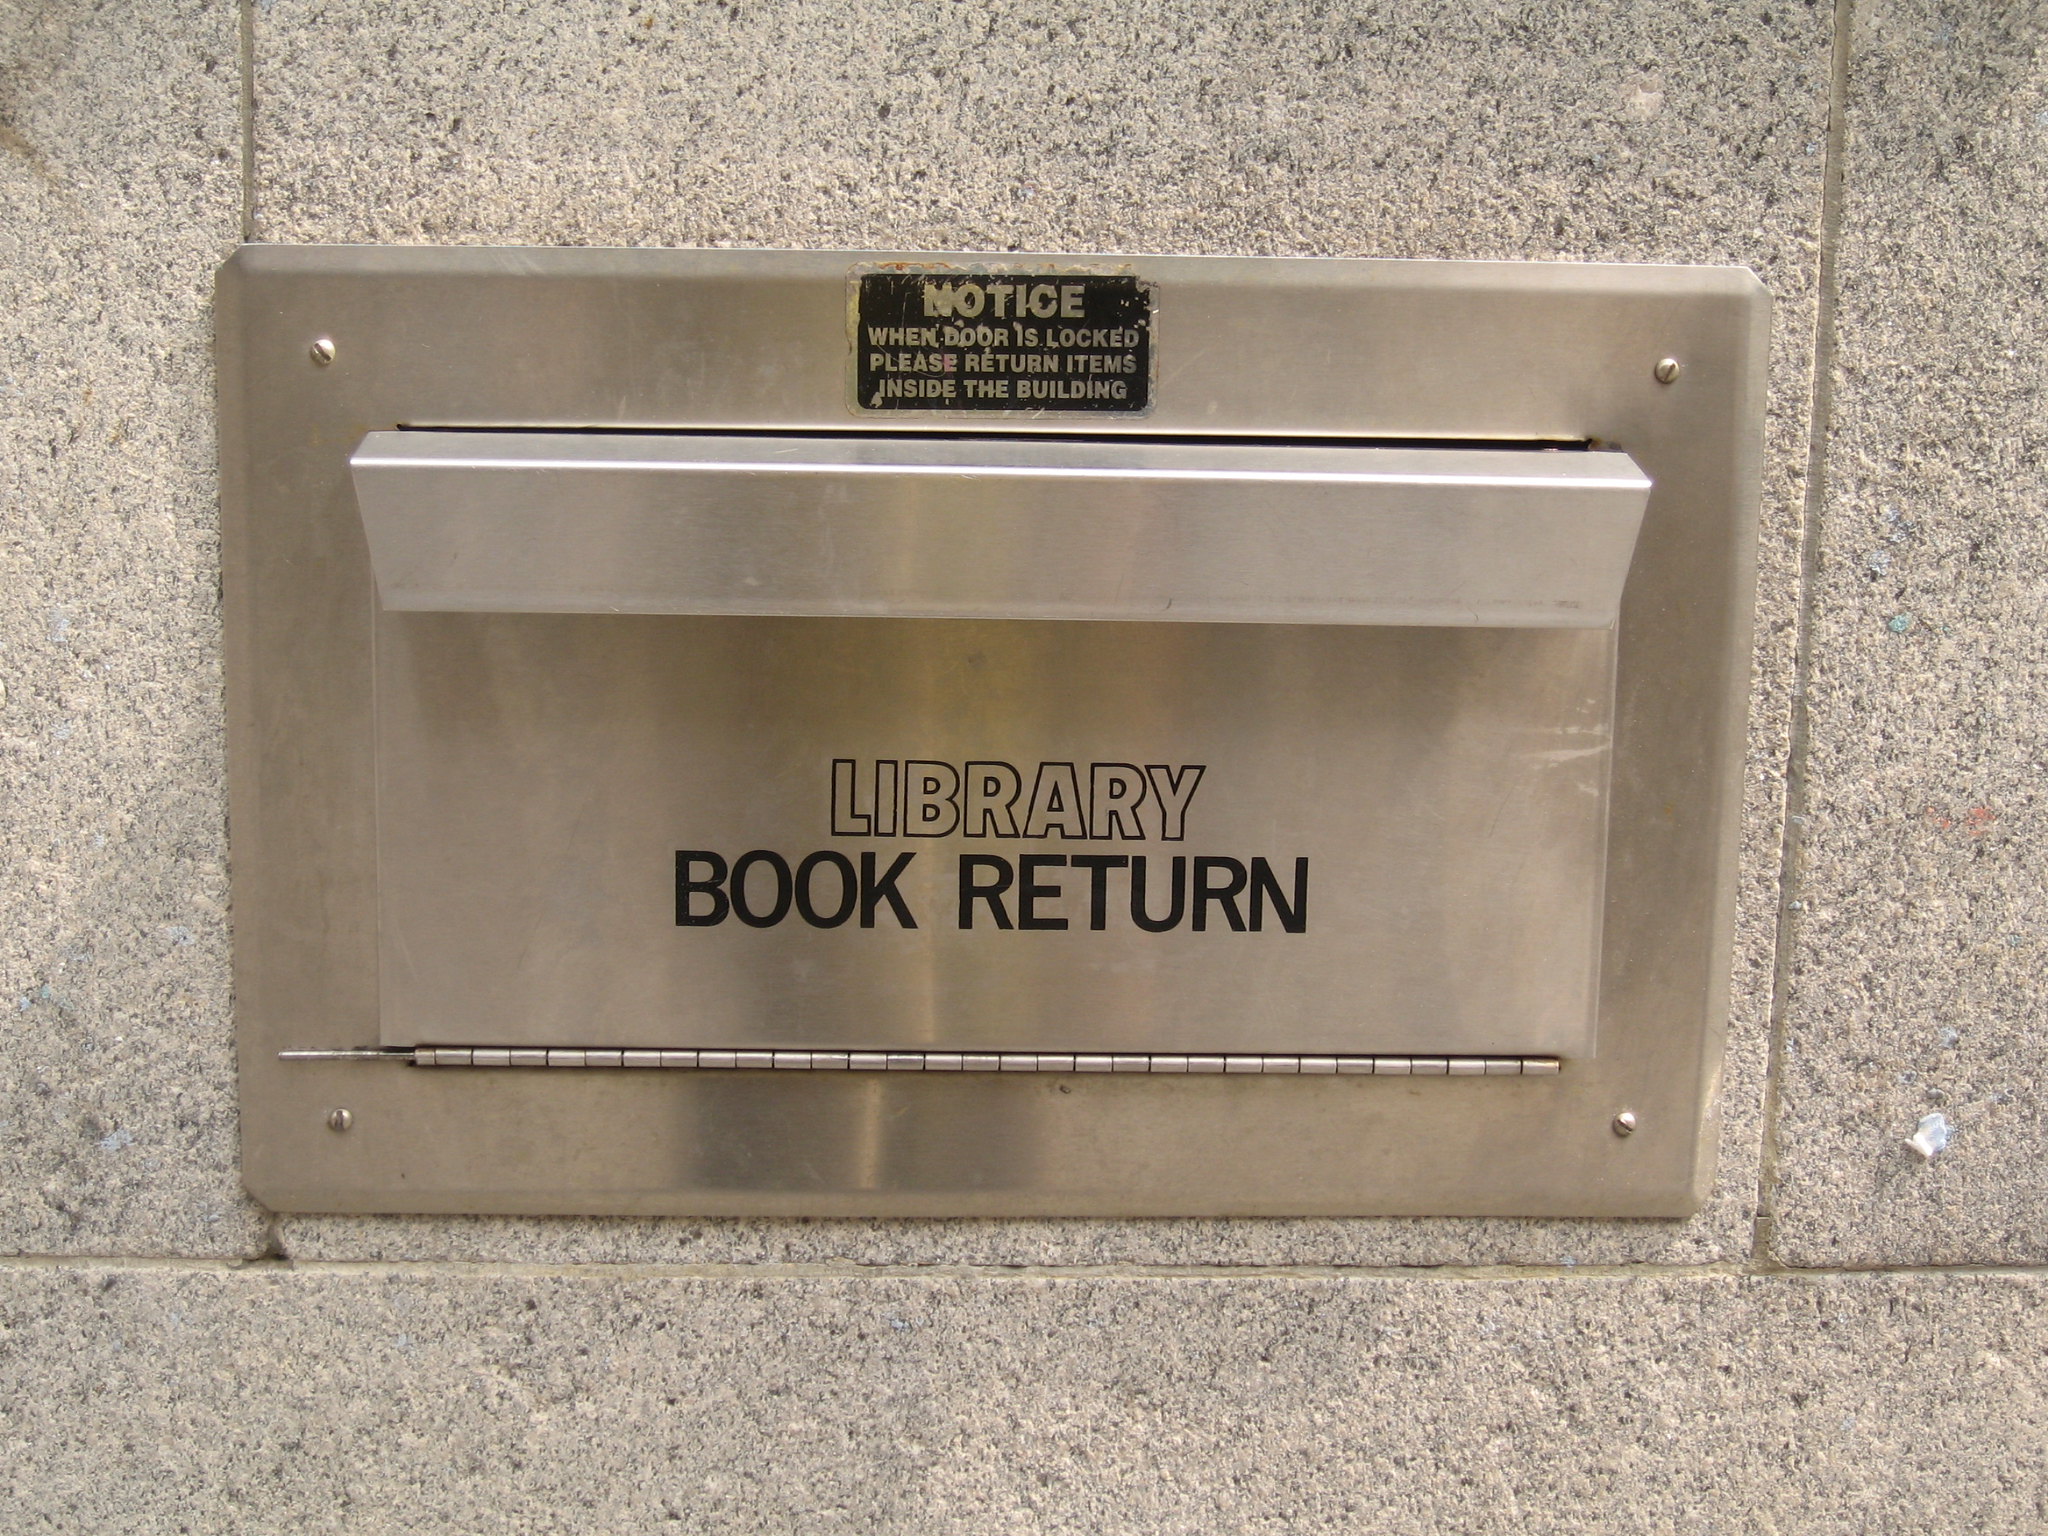 Library drop box that severed finger